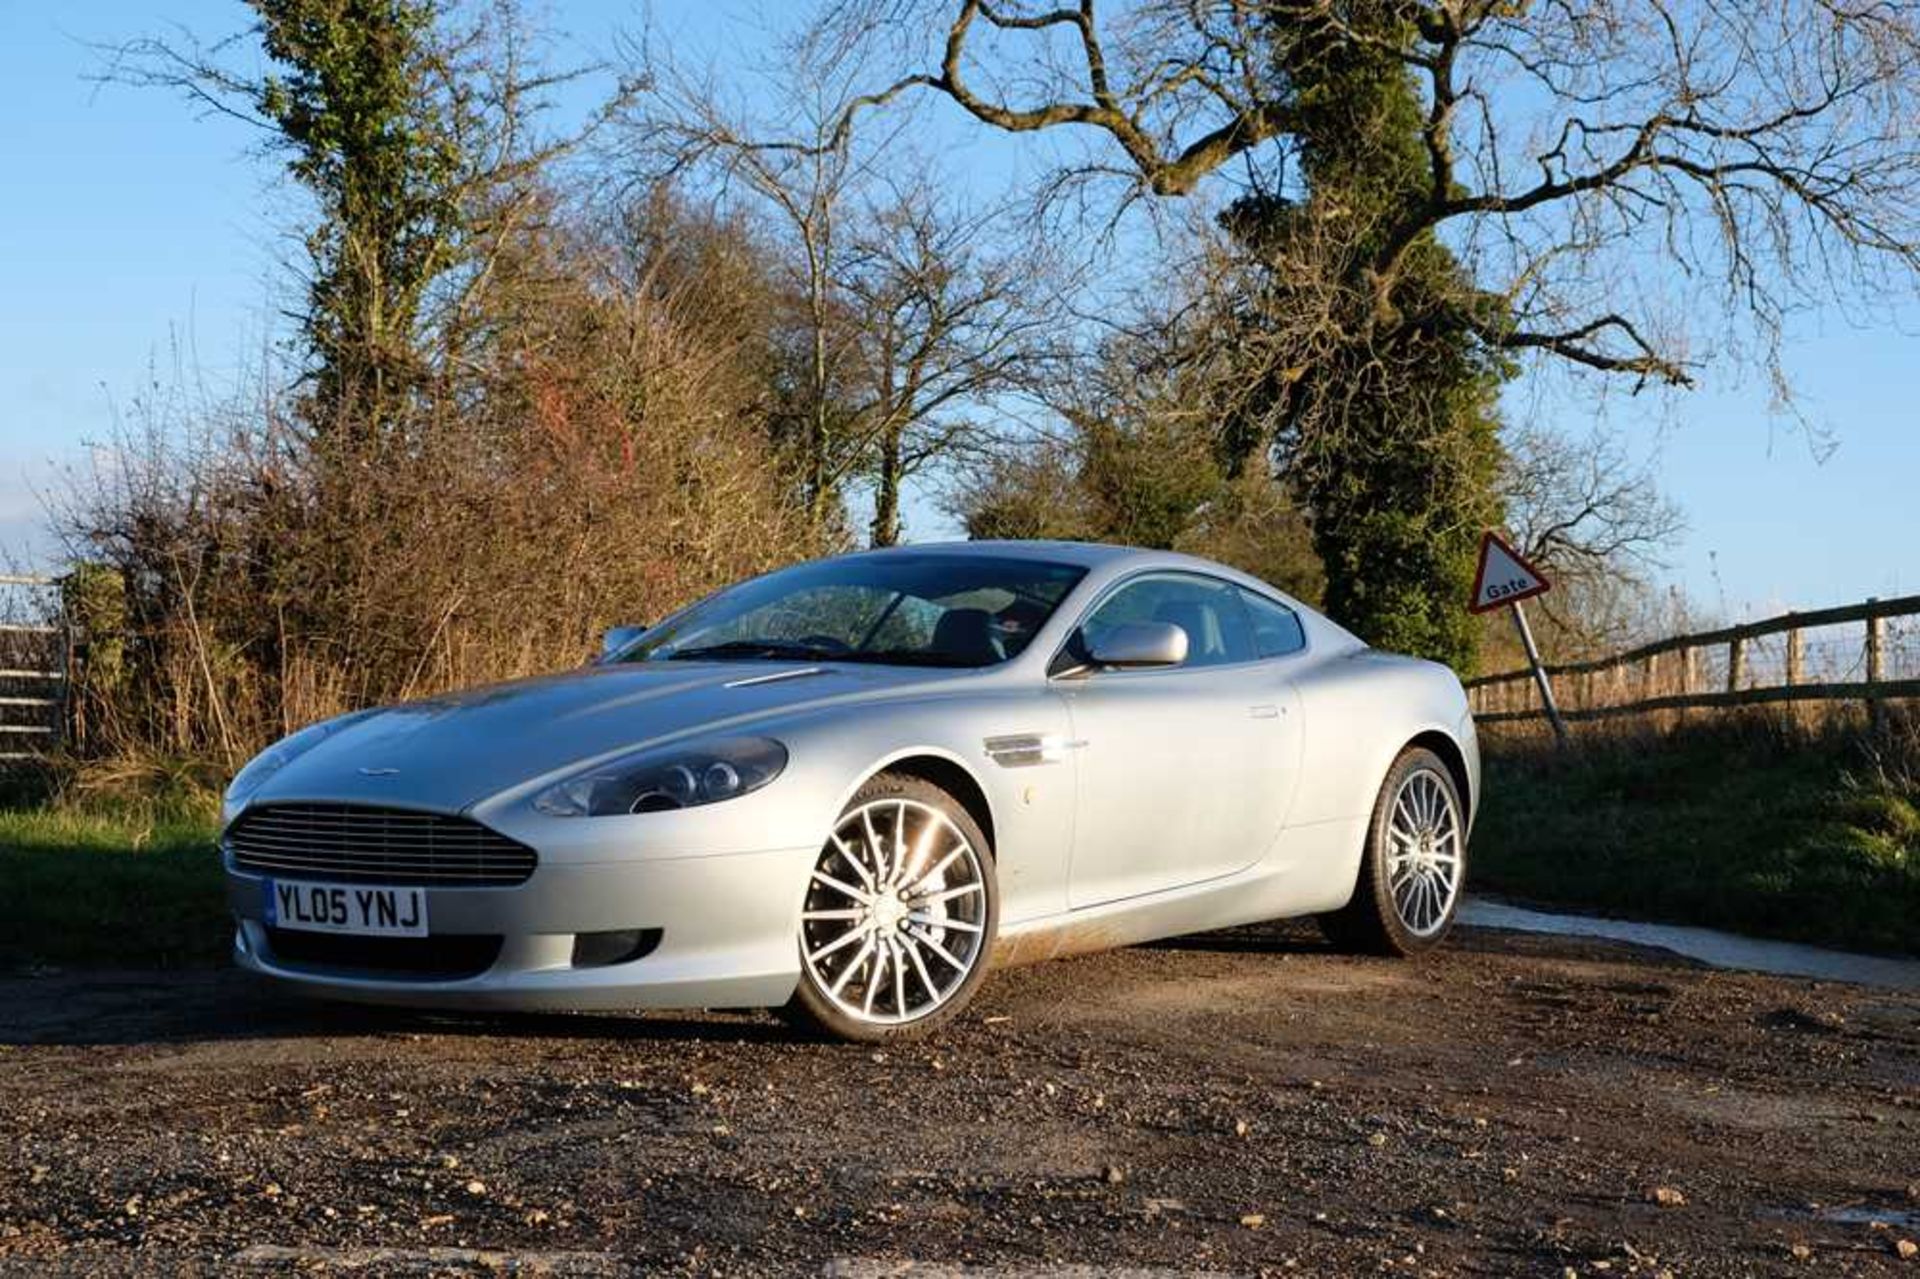 2005 Aston Martin DB9 c.25,000 from new and 4 former keepers - Image 8 of 59